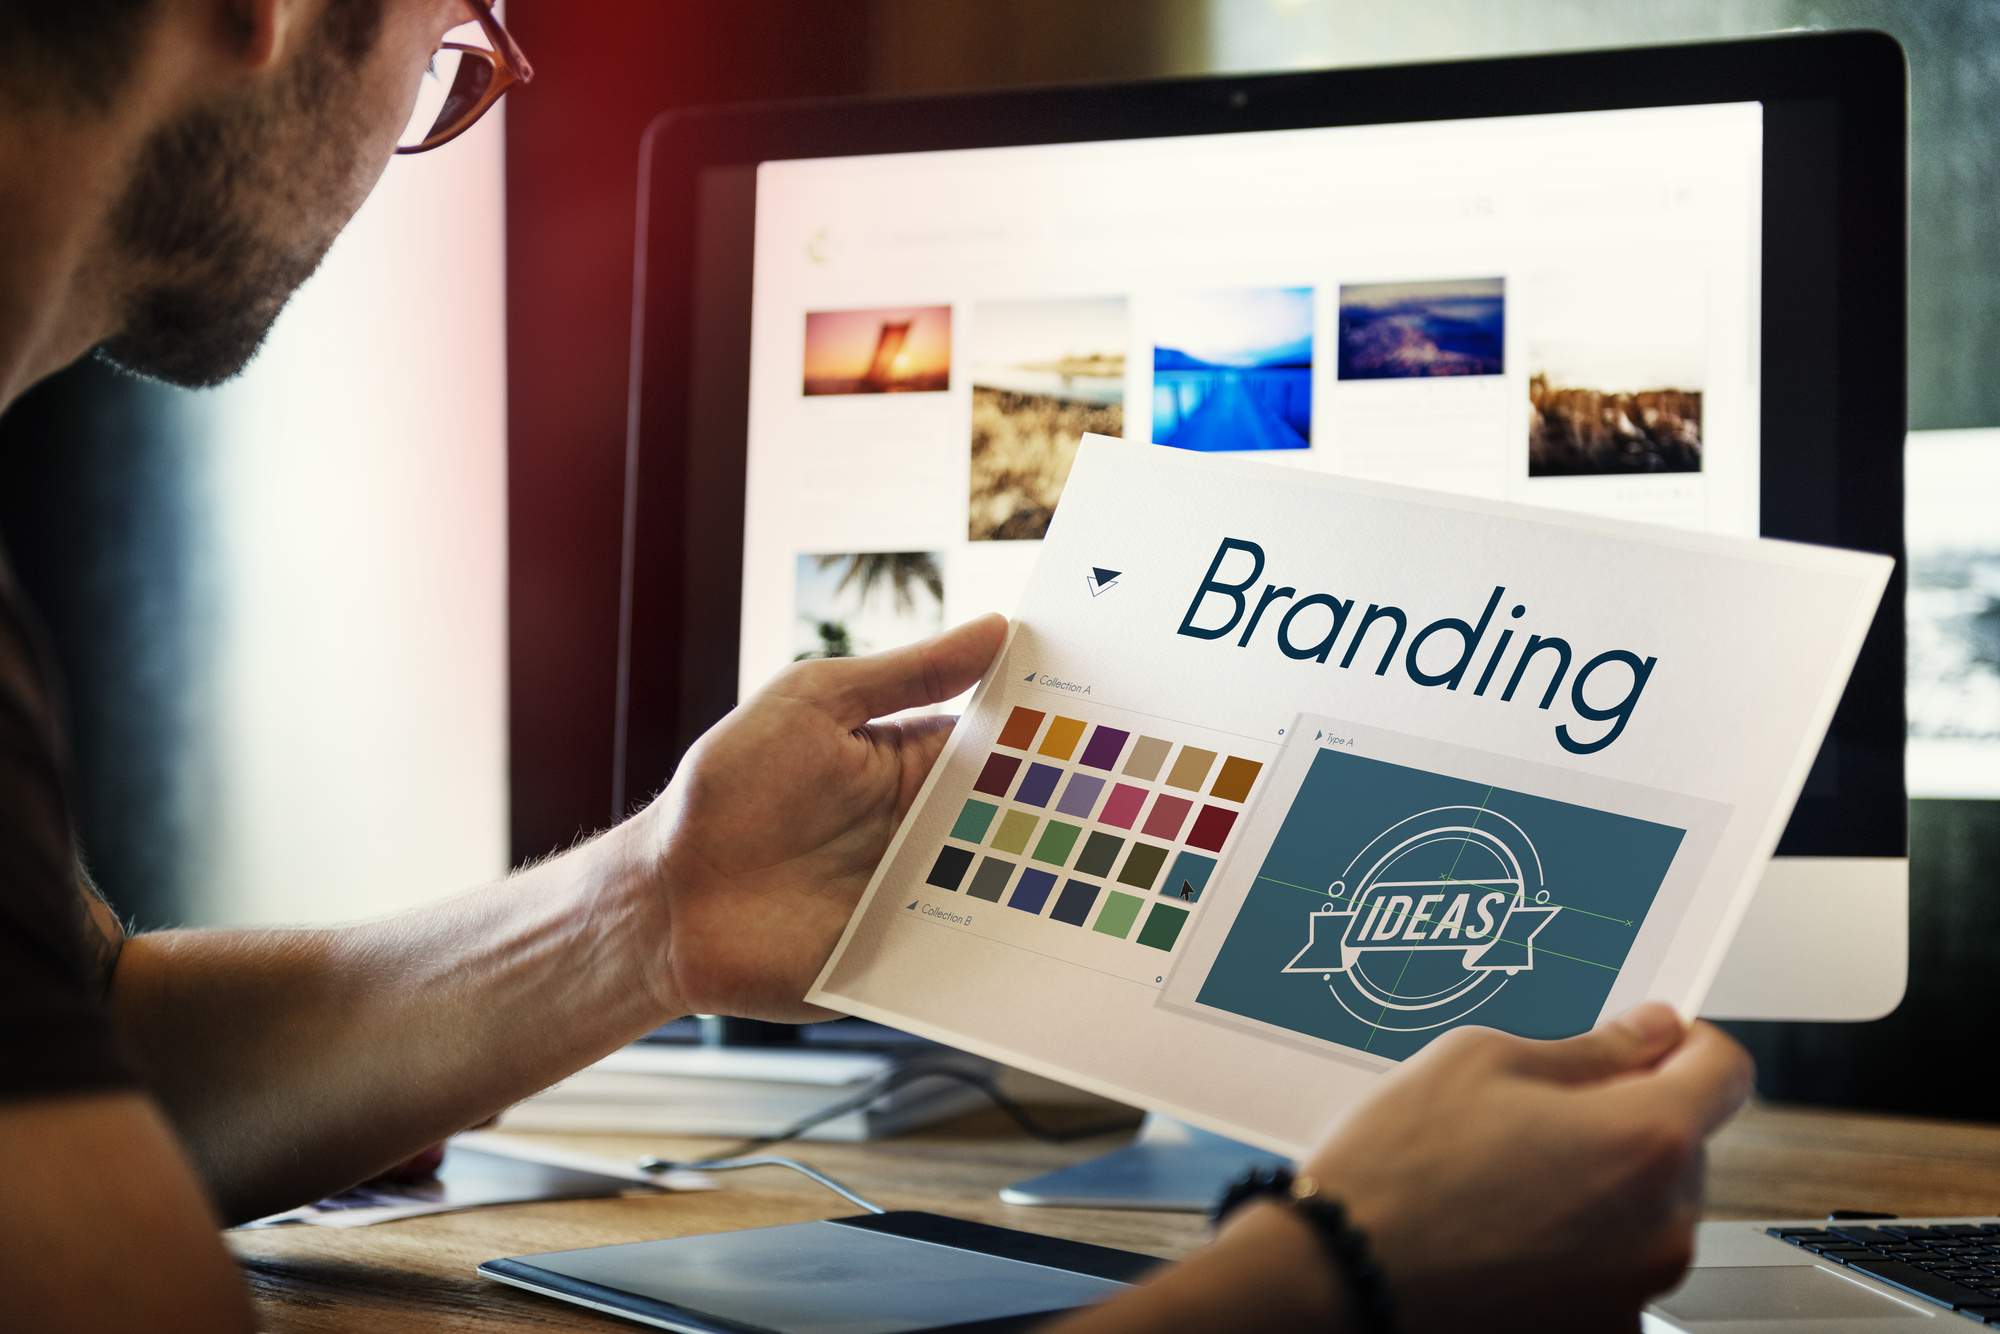 What Are the Best Ways to Increase Brand Awareness?